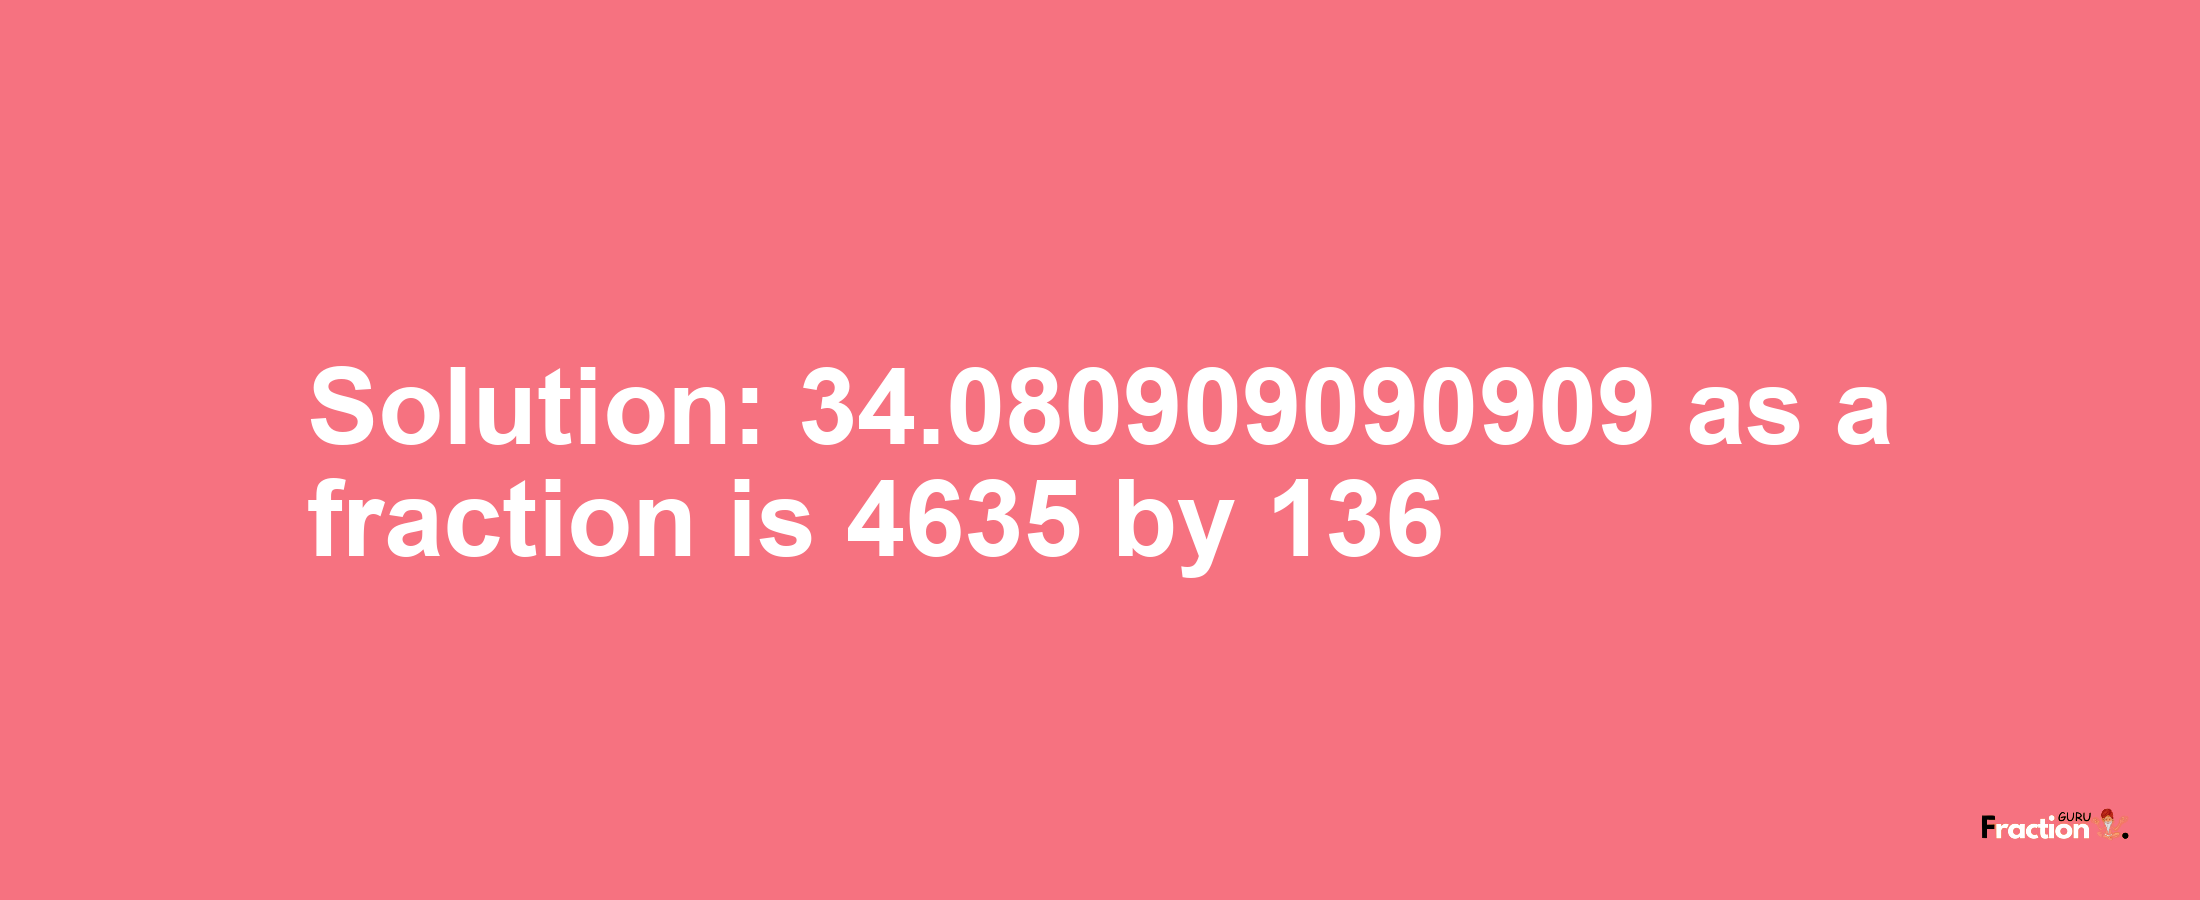 Solution:34.080909090909 as a fraction is 4635/136